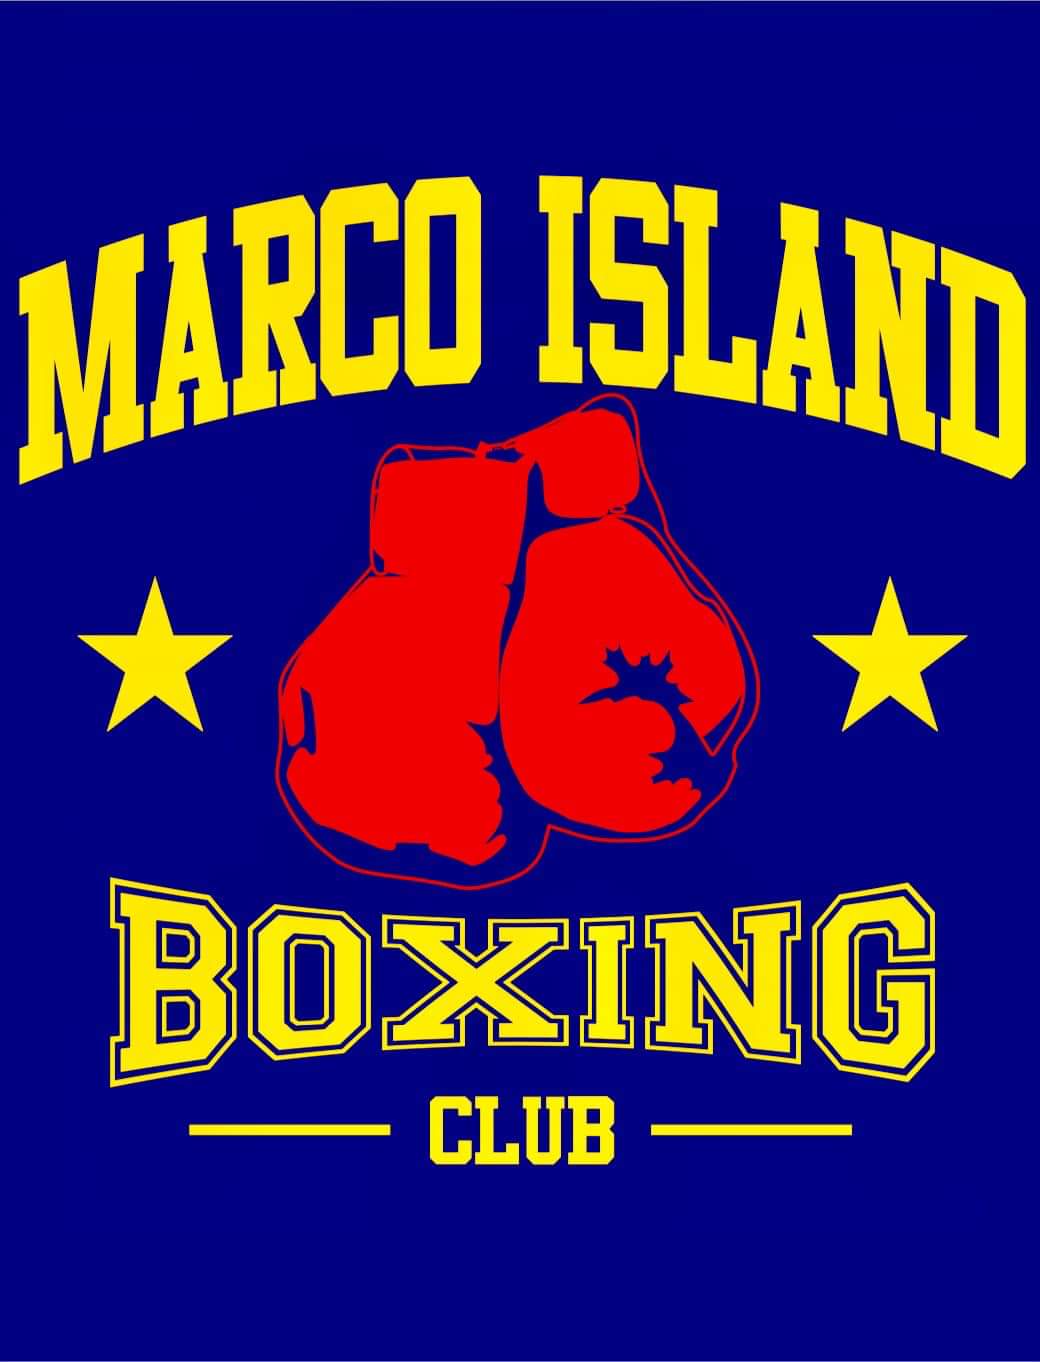 Marco Island Boxing Club - Frank Gervin Memorial, Collier, Florida, United States